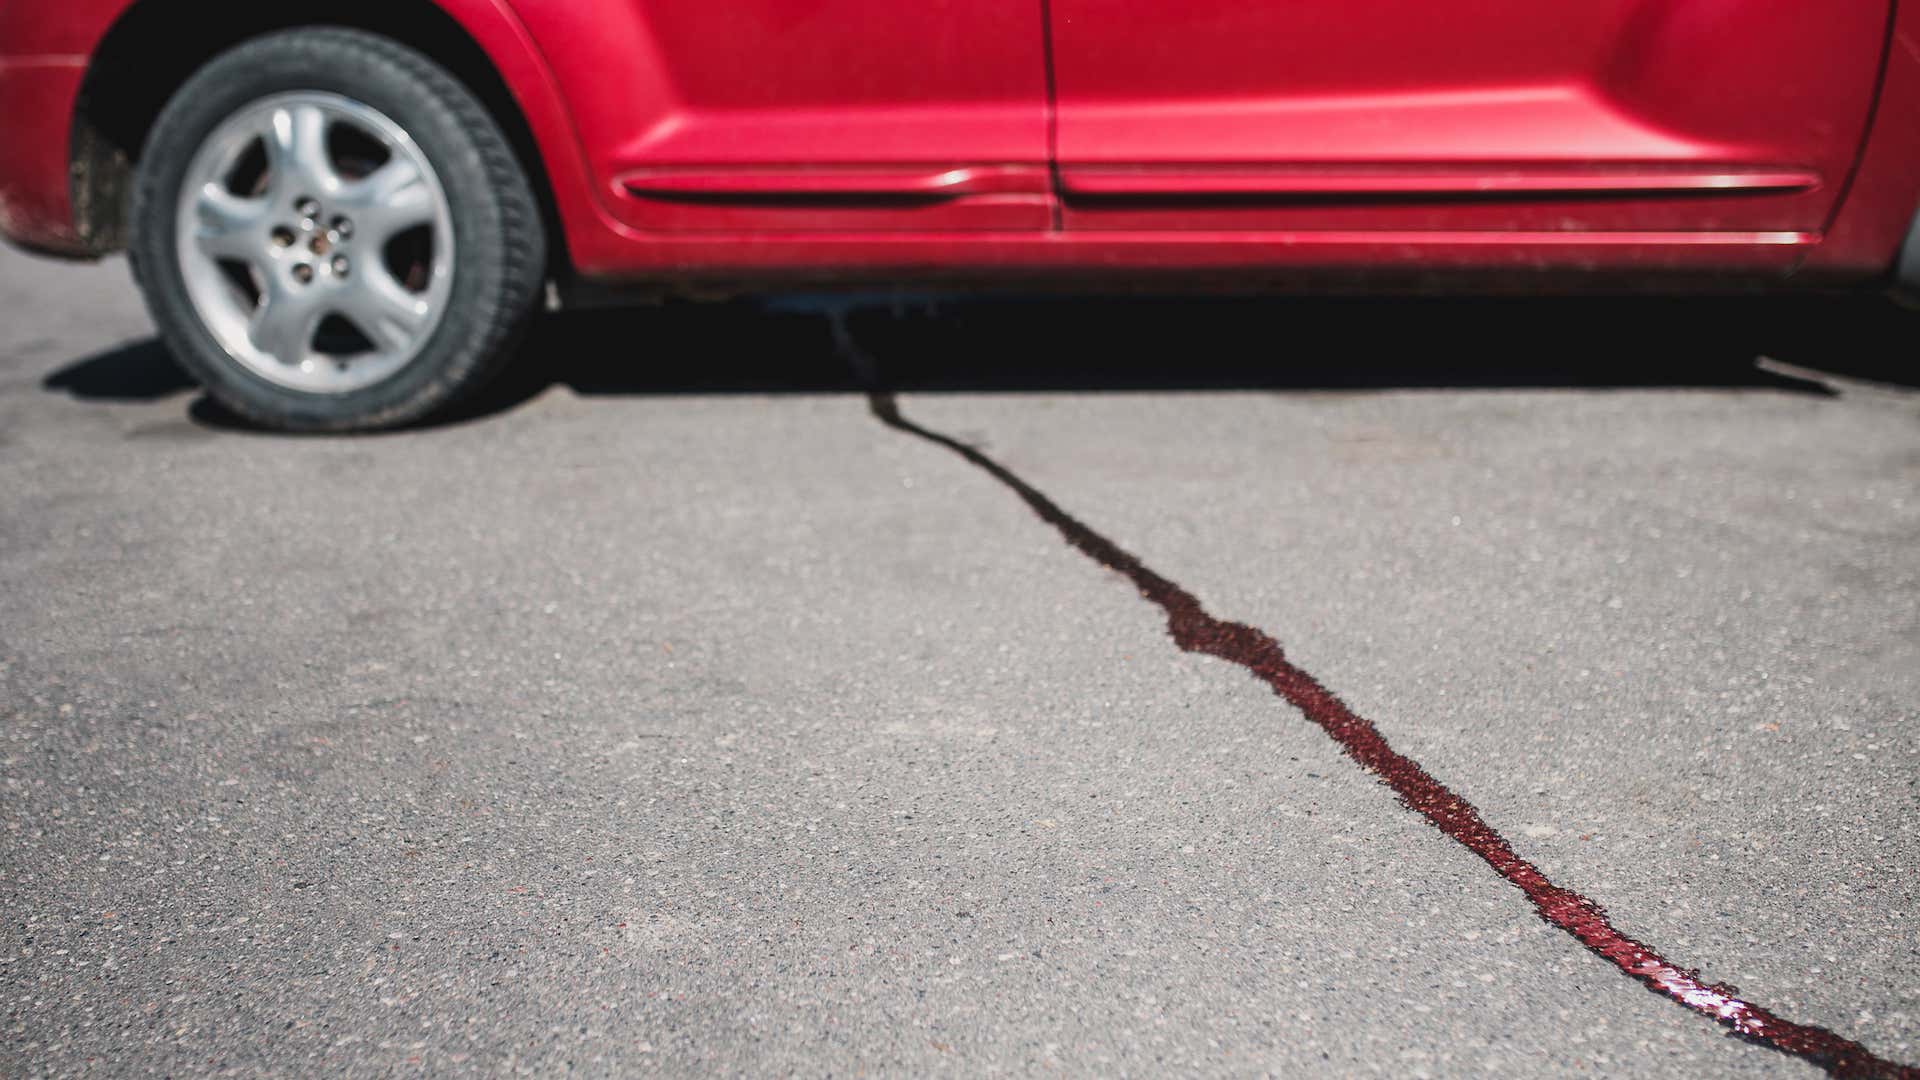 Maintaining your car will help quite a bit with preventing stains.